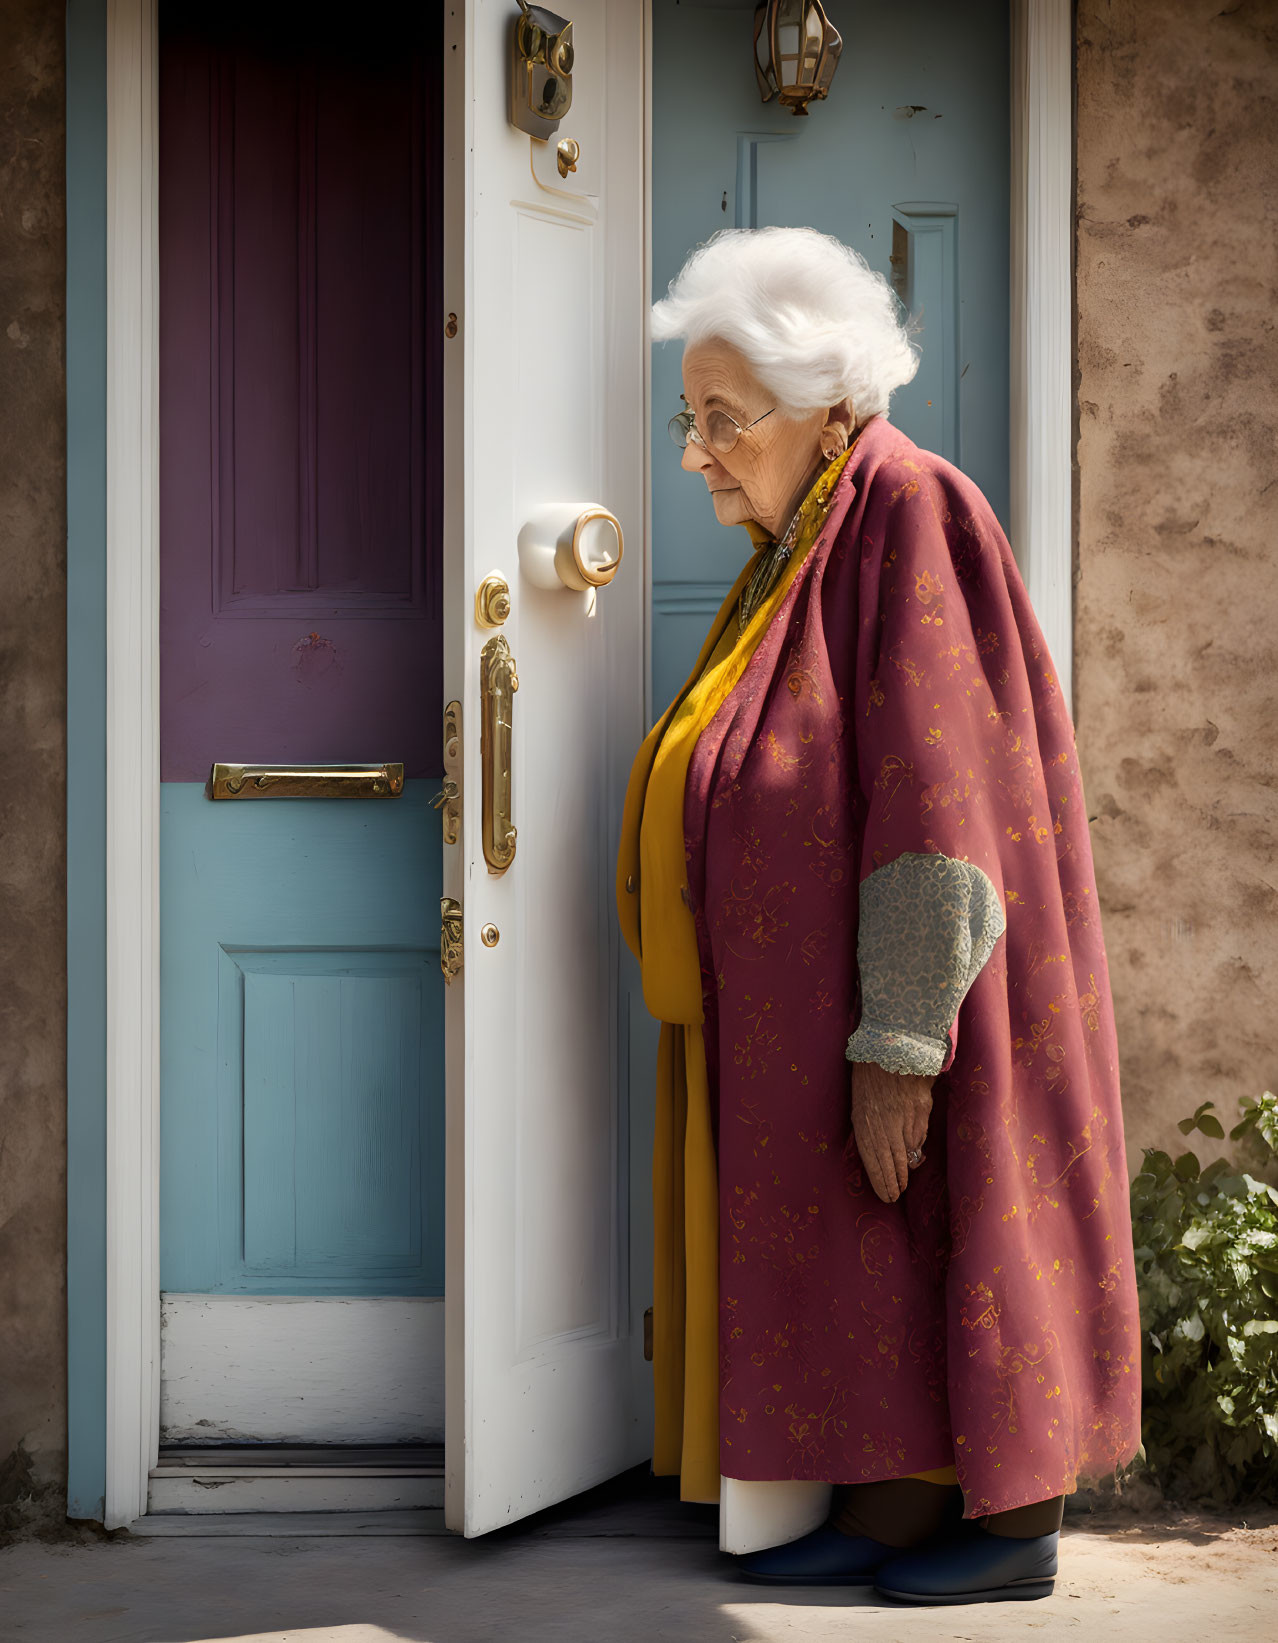 Elderly woman with white hair by open blue door.